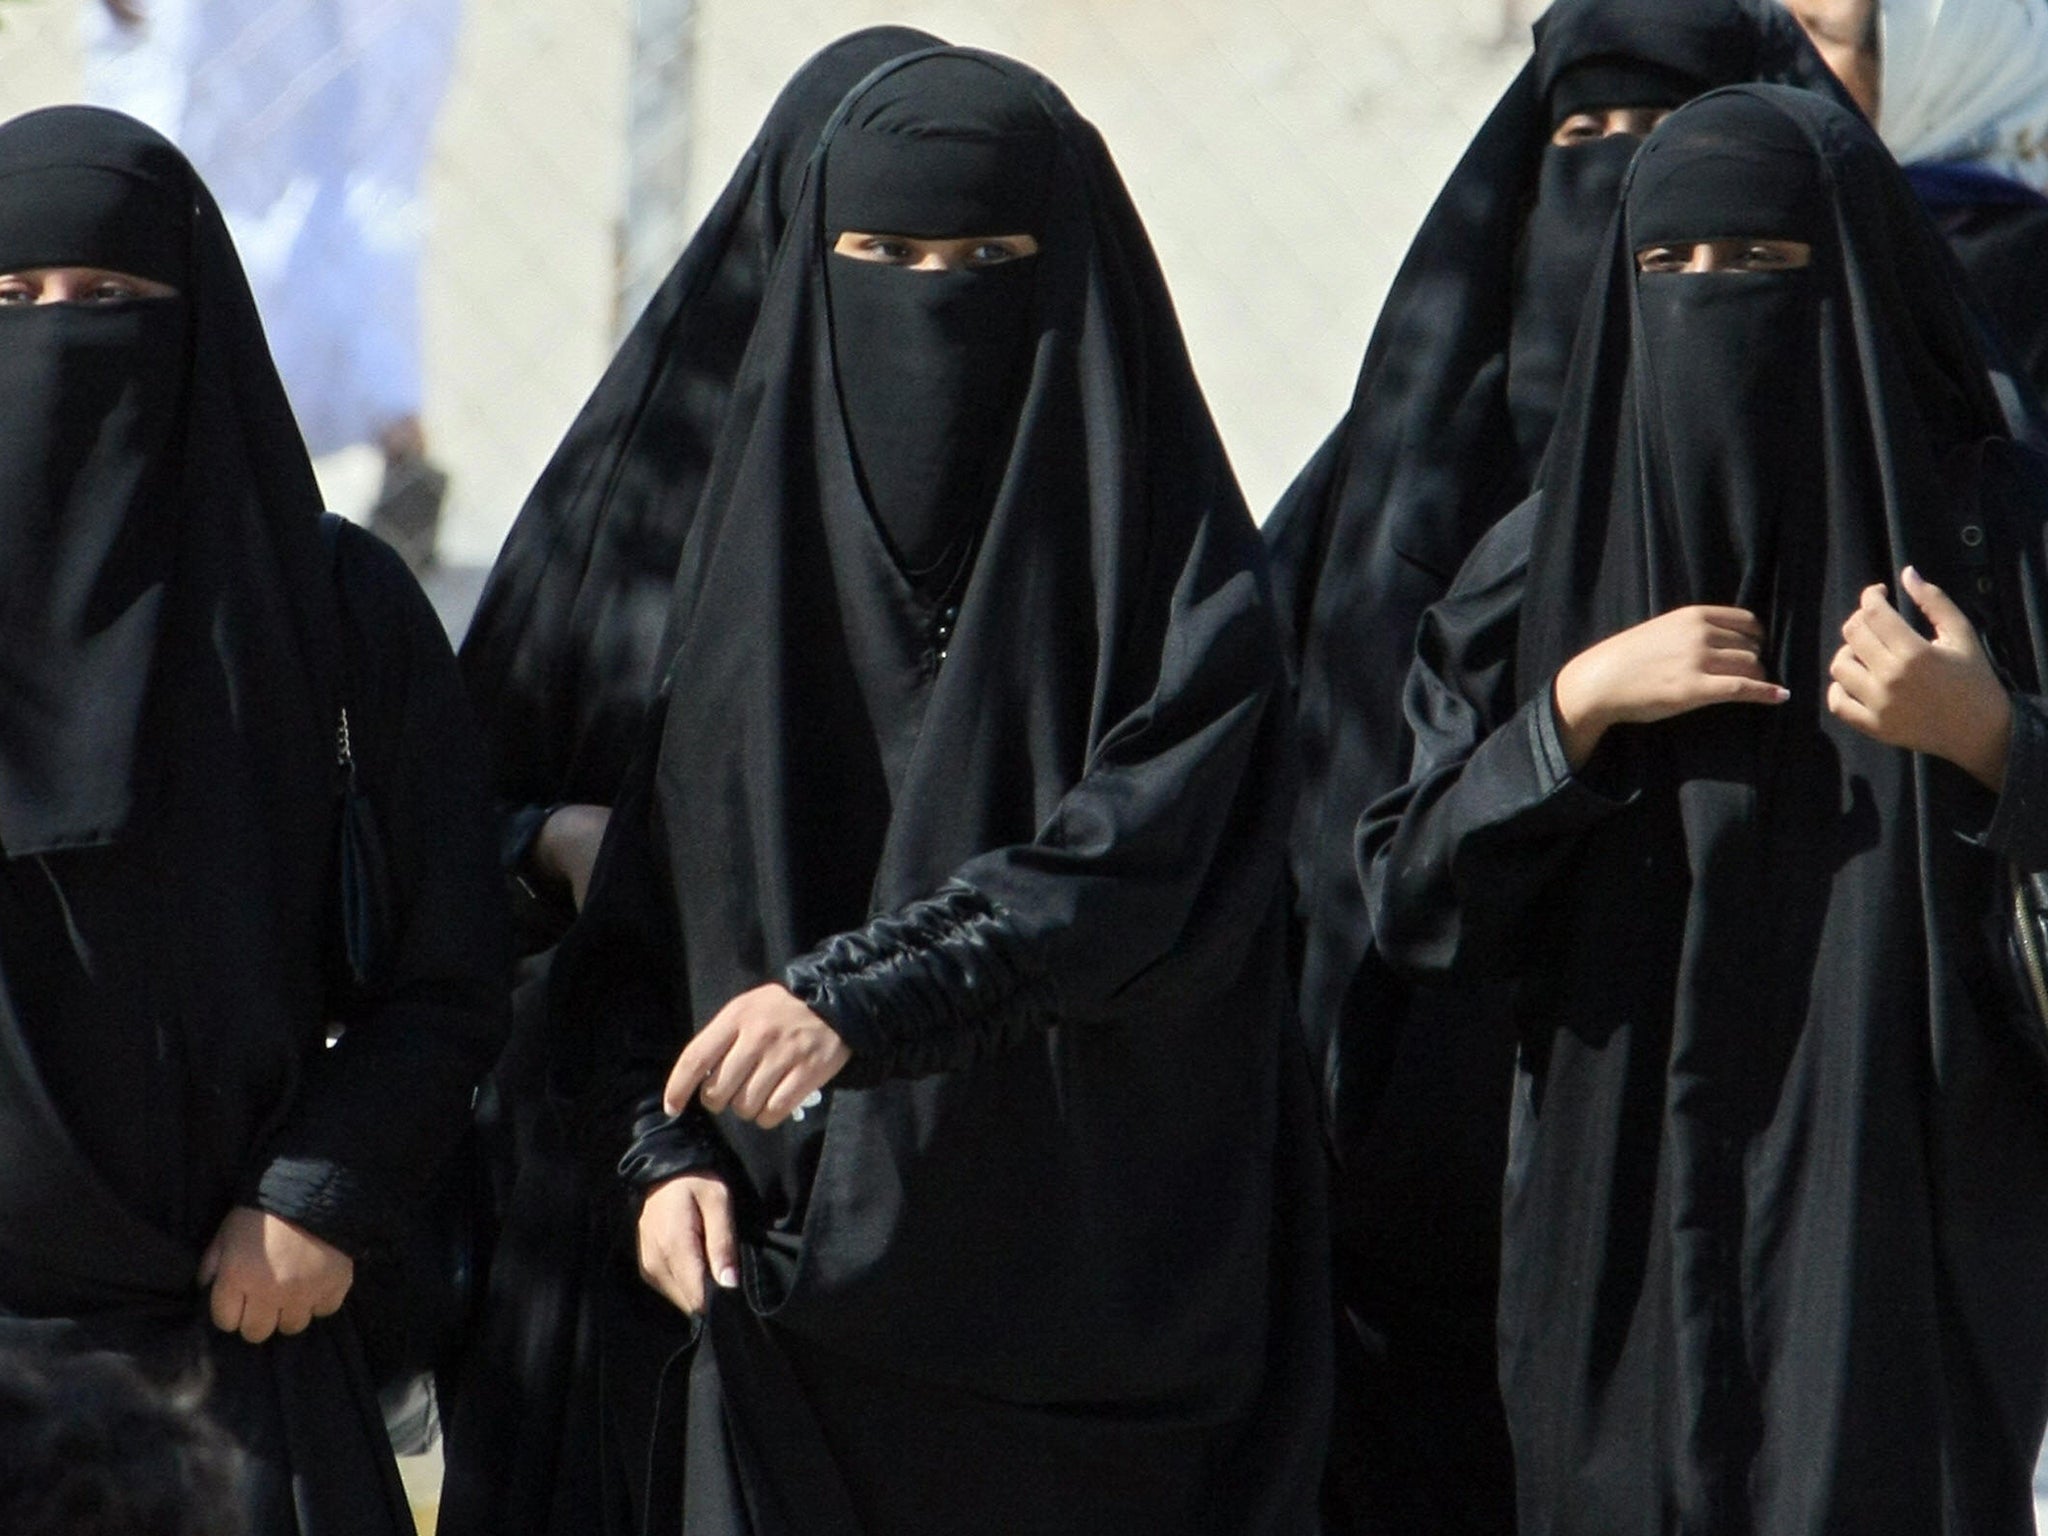 Saudi Arabian women finally allowed to apply for passport and travel independently The Independent The Independent image